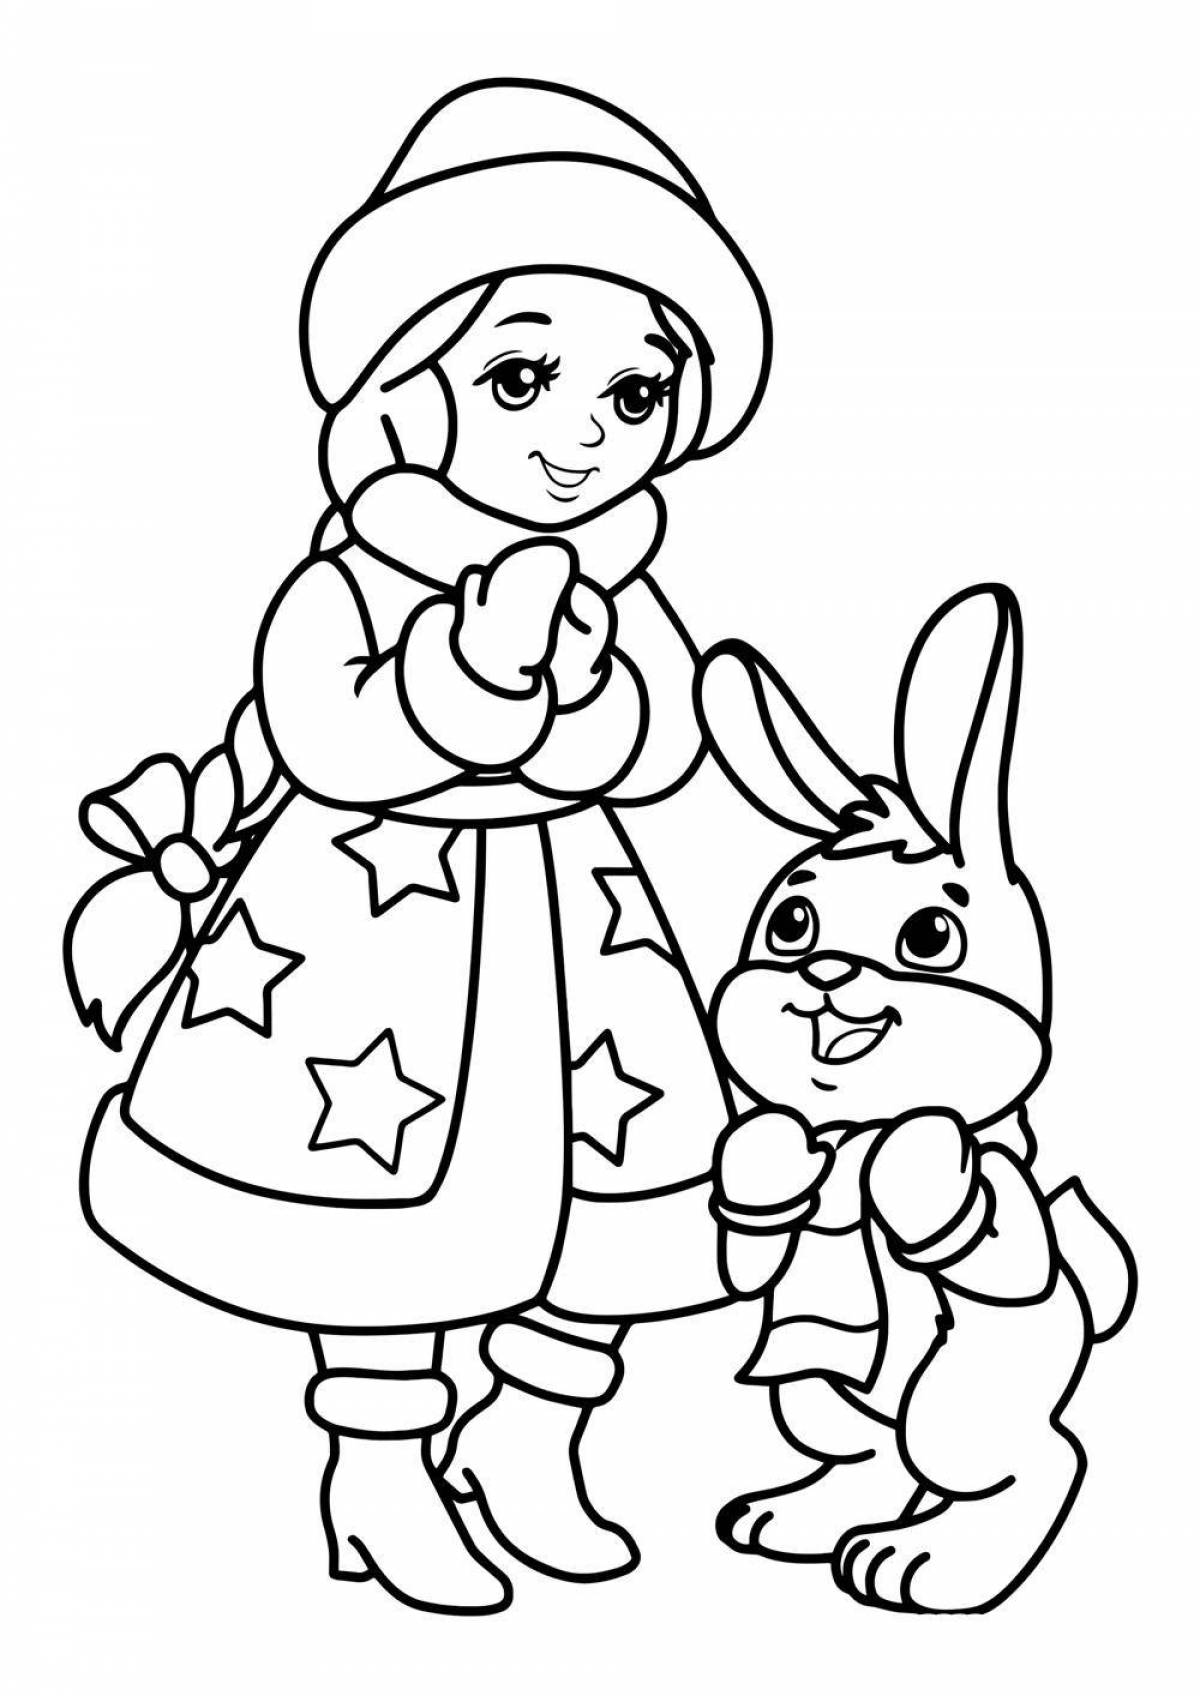 Exotic snow maiden coloring book for kids